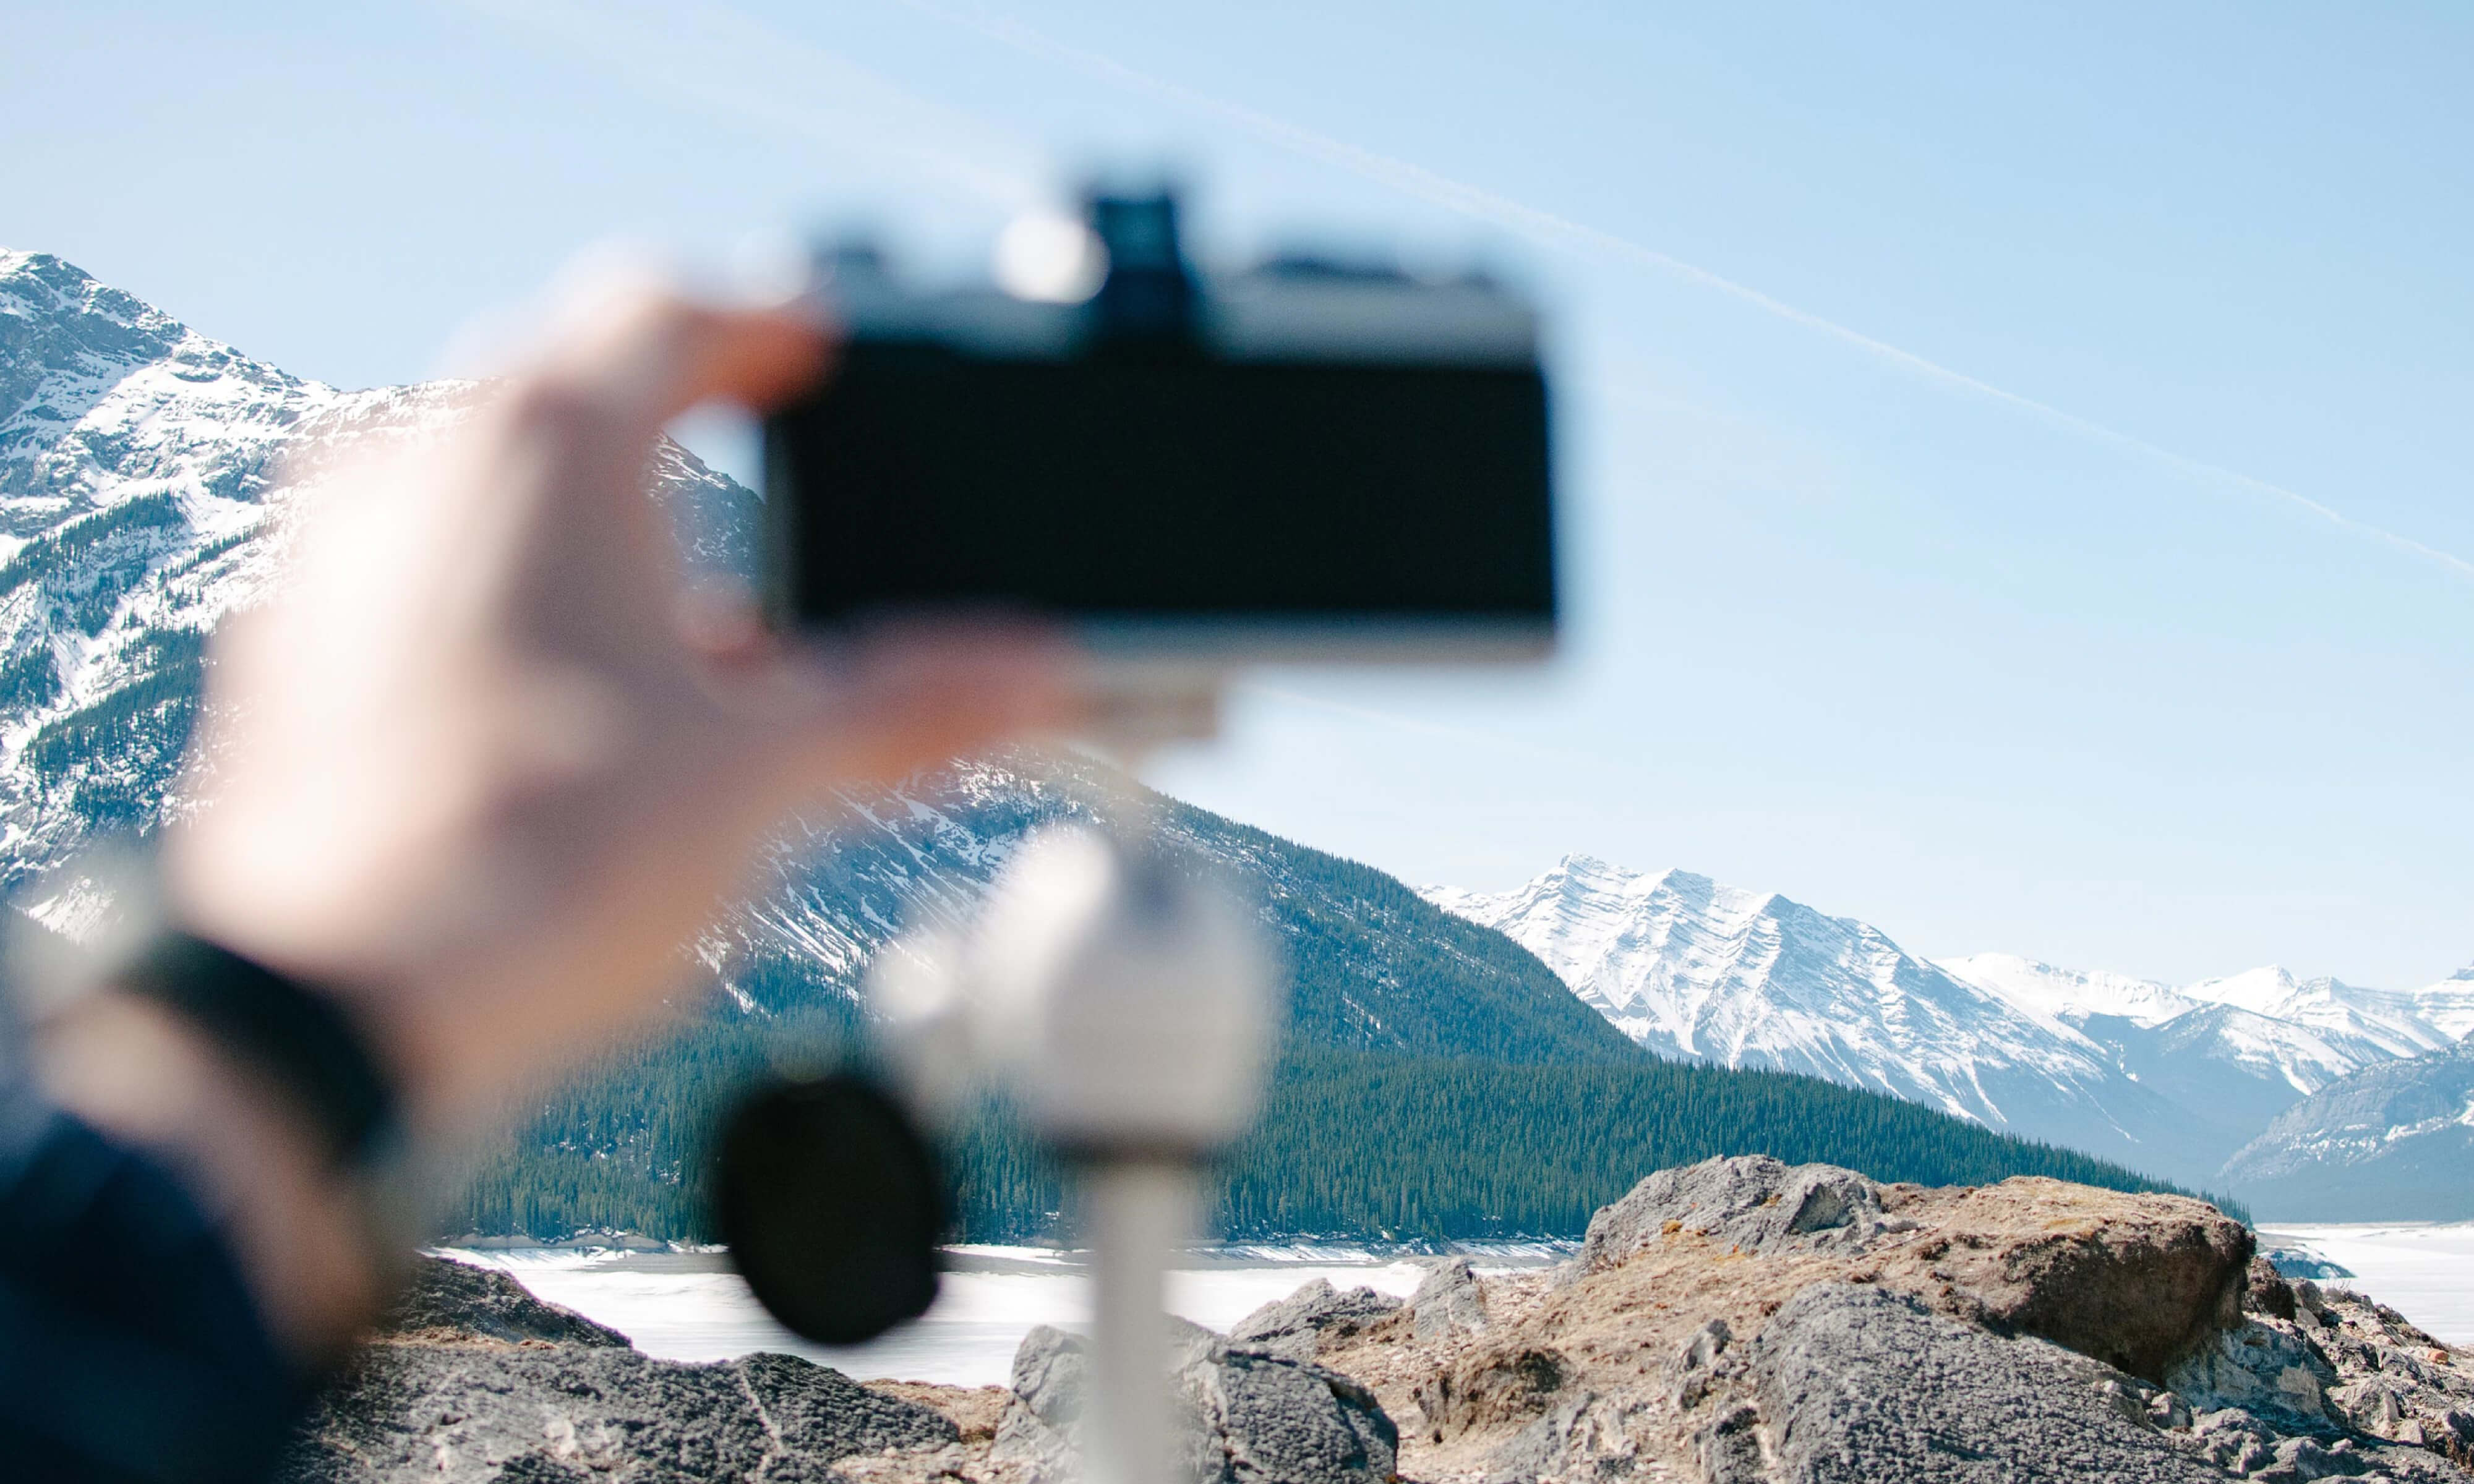 The 4 Best Mirrorless Cameras for Travel – Our Picks